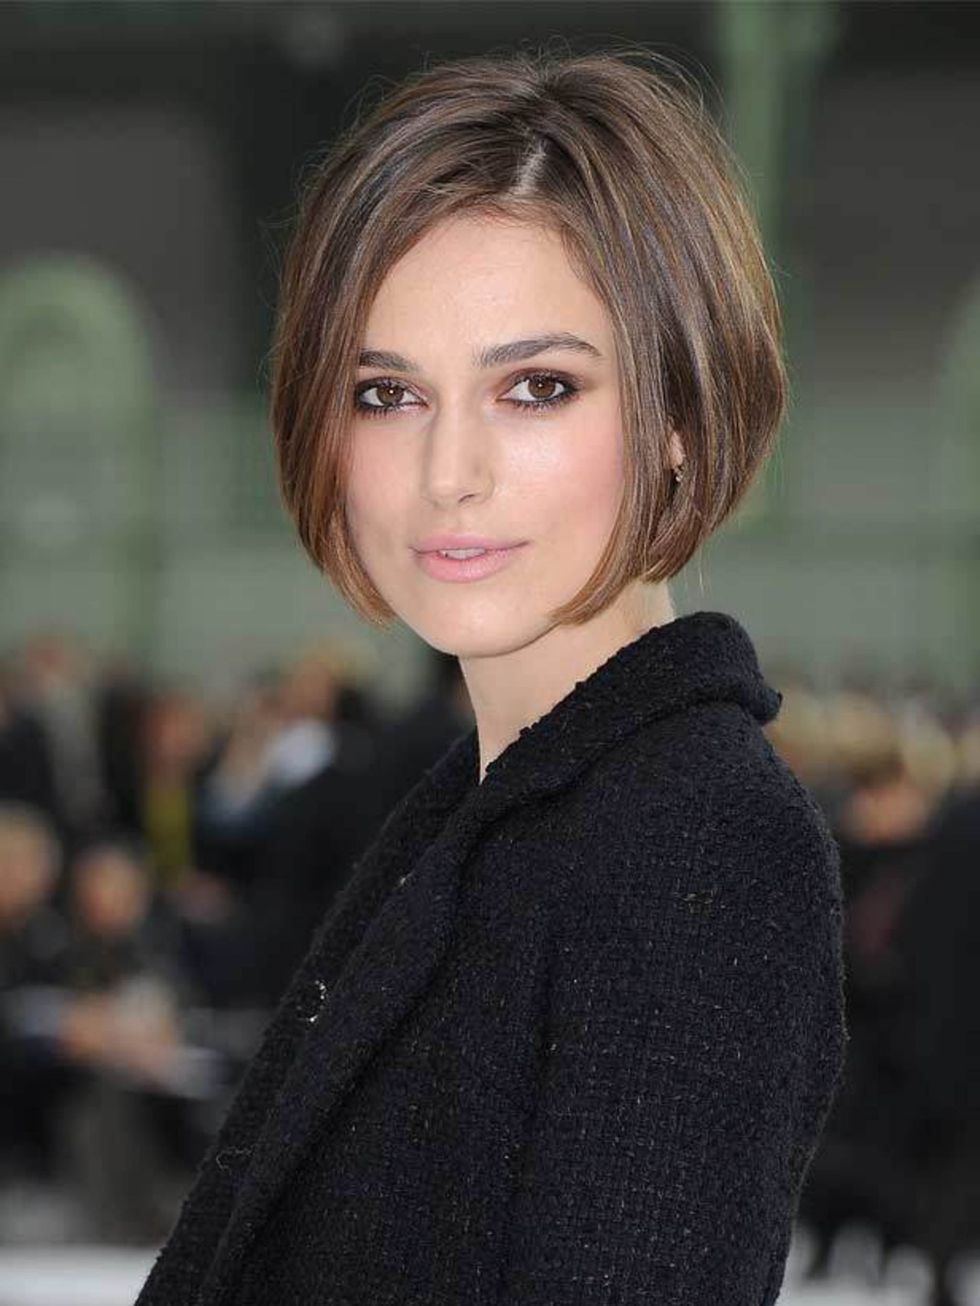 <p>Paris Fashion Week - Chanel Show, October 2010</p><p><a href="http://www.elleuk.com/beauty/celeb-beauty/celeb-hair/%28section%29/The-Bob">Find out more about the bob...</a></p>